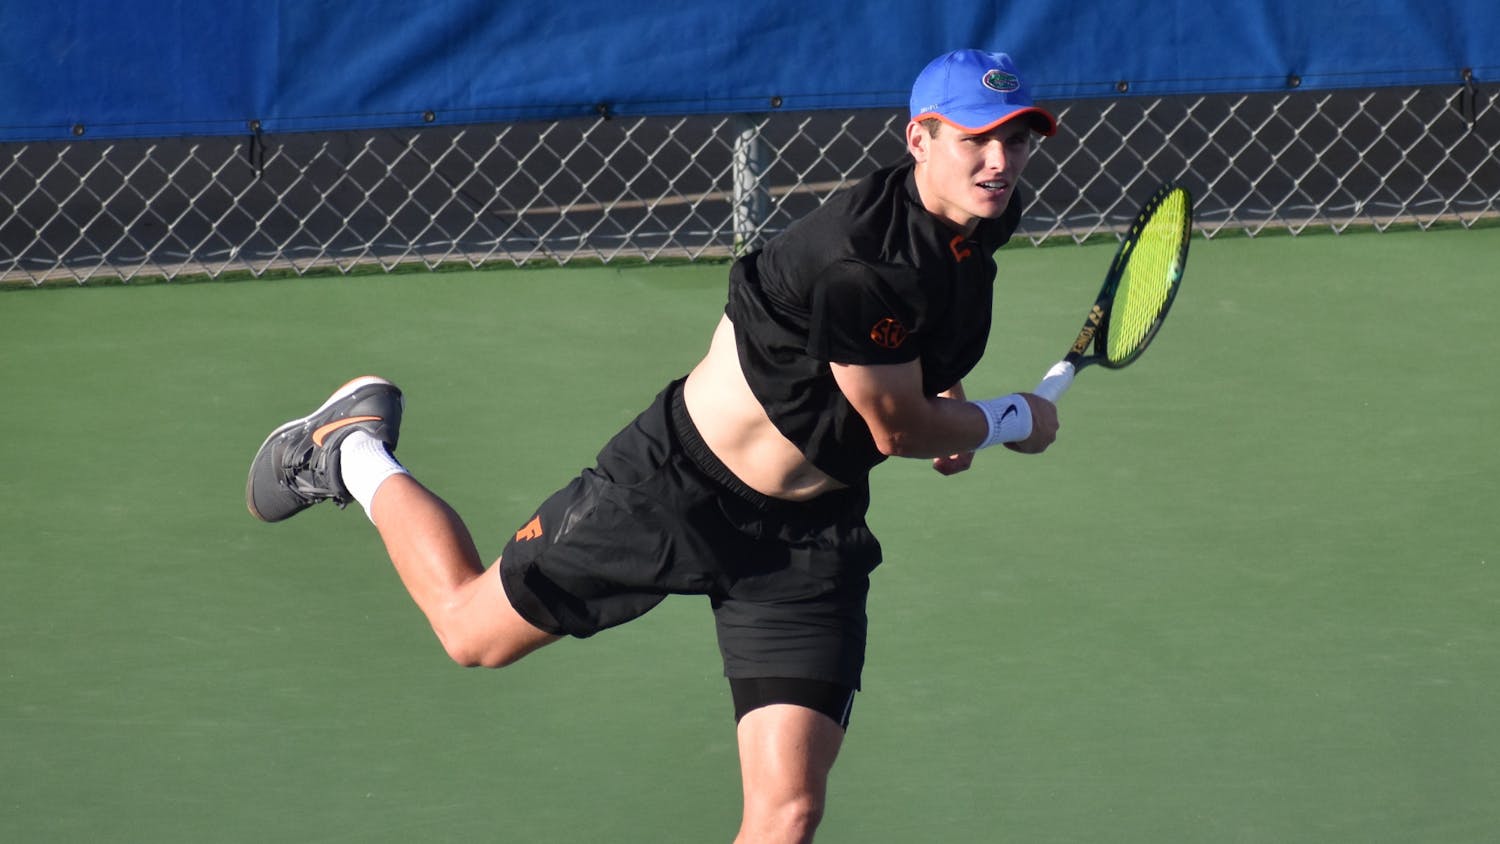 Sam Riffice against TCU on March 17. Riffice is set to compete in the individual singles title match Friday.